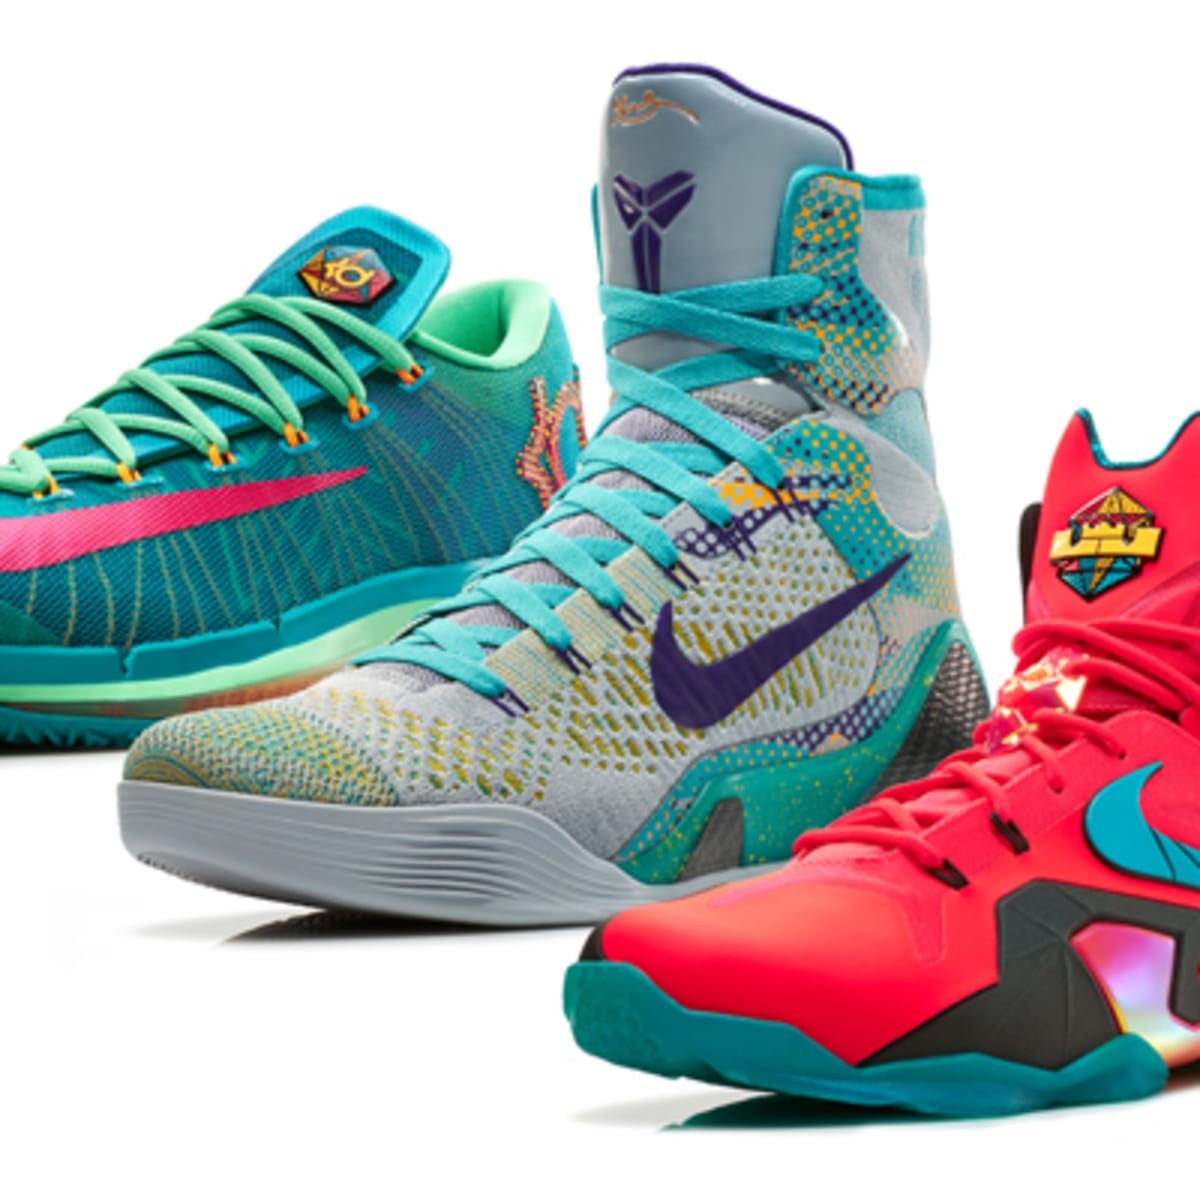 Nike unveils 2014 All-Star Game sneakers for LeBron James, Kobe